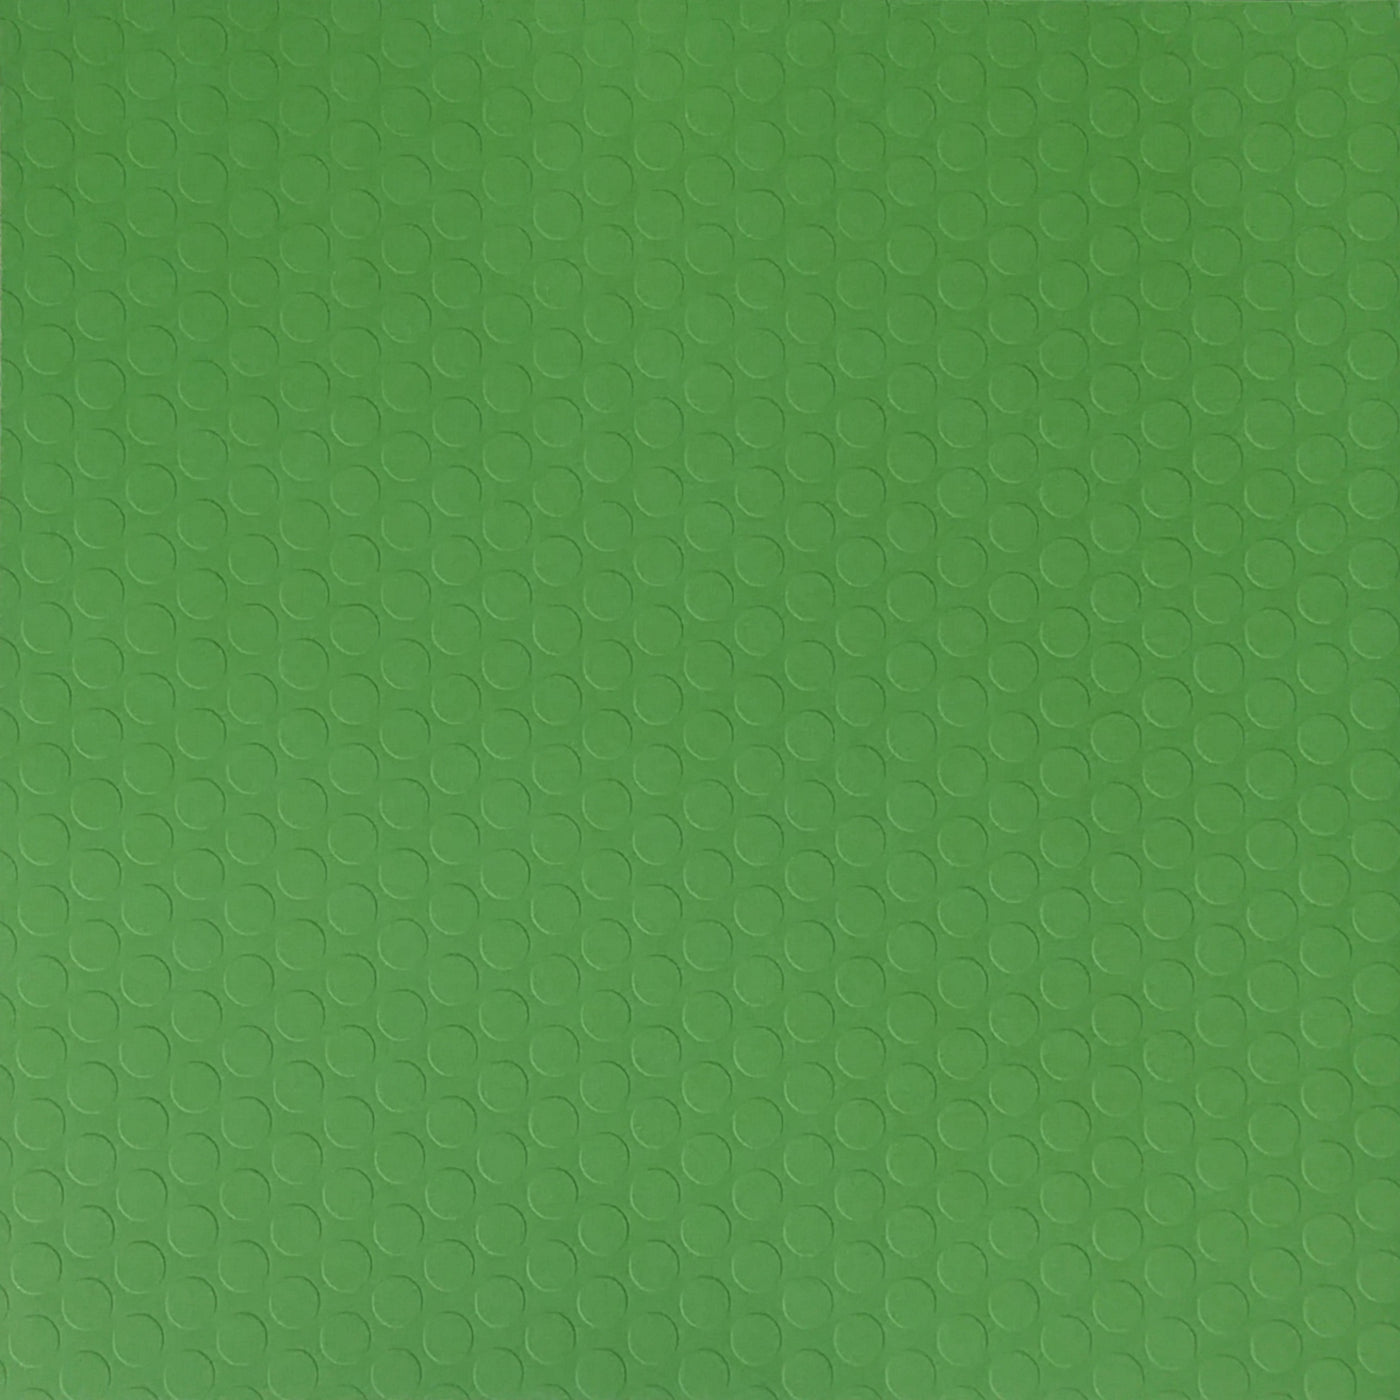 12x12 green cardstock with color-on-color embossed dots - Recollections Signature